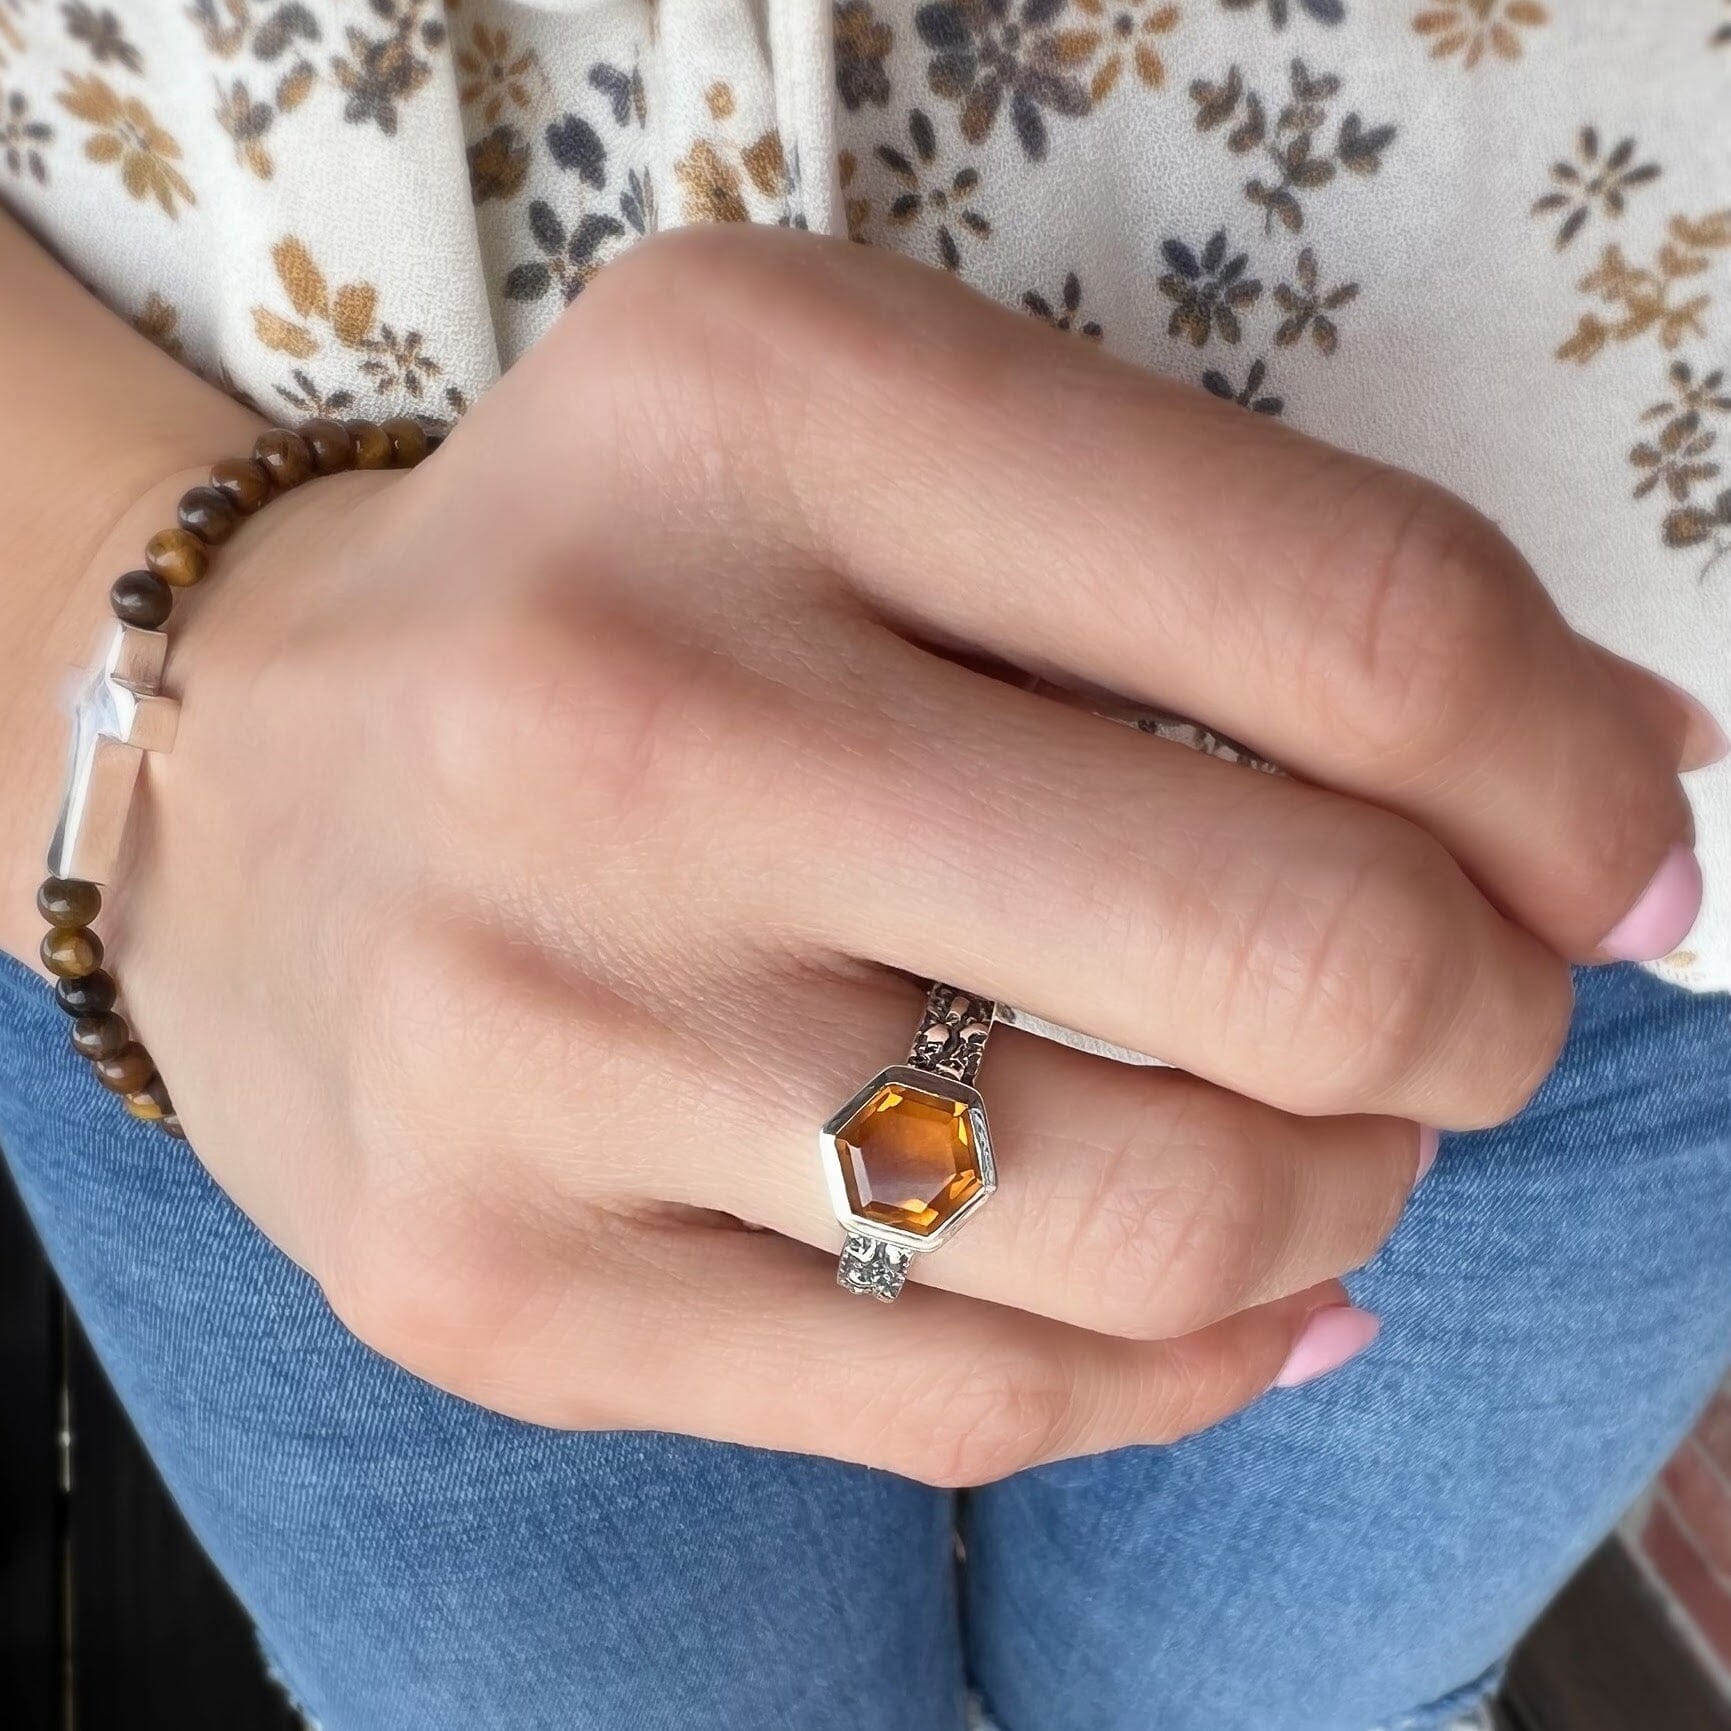 Honeysuckle Breeze ring paired with Beaded Cross Bracelet in tiger's eye